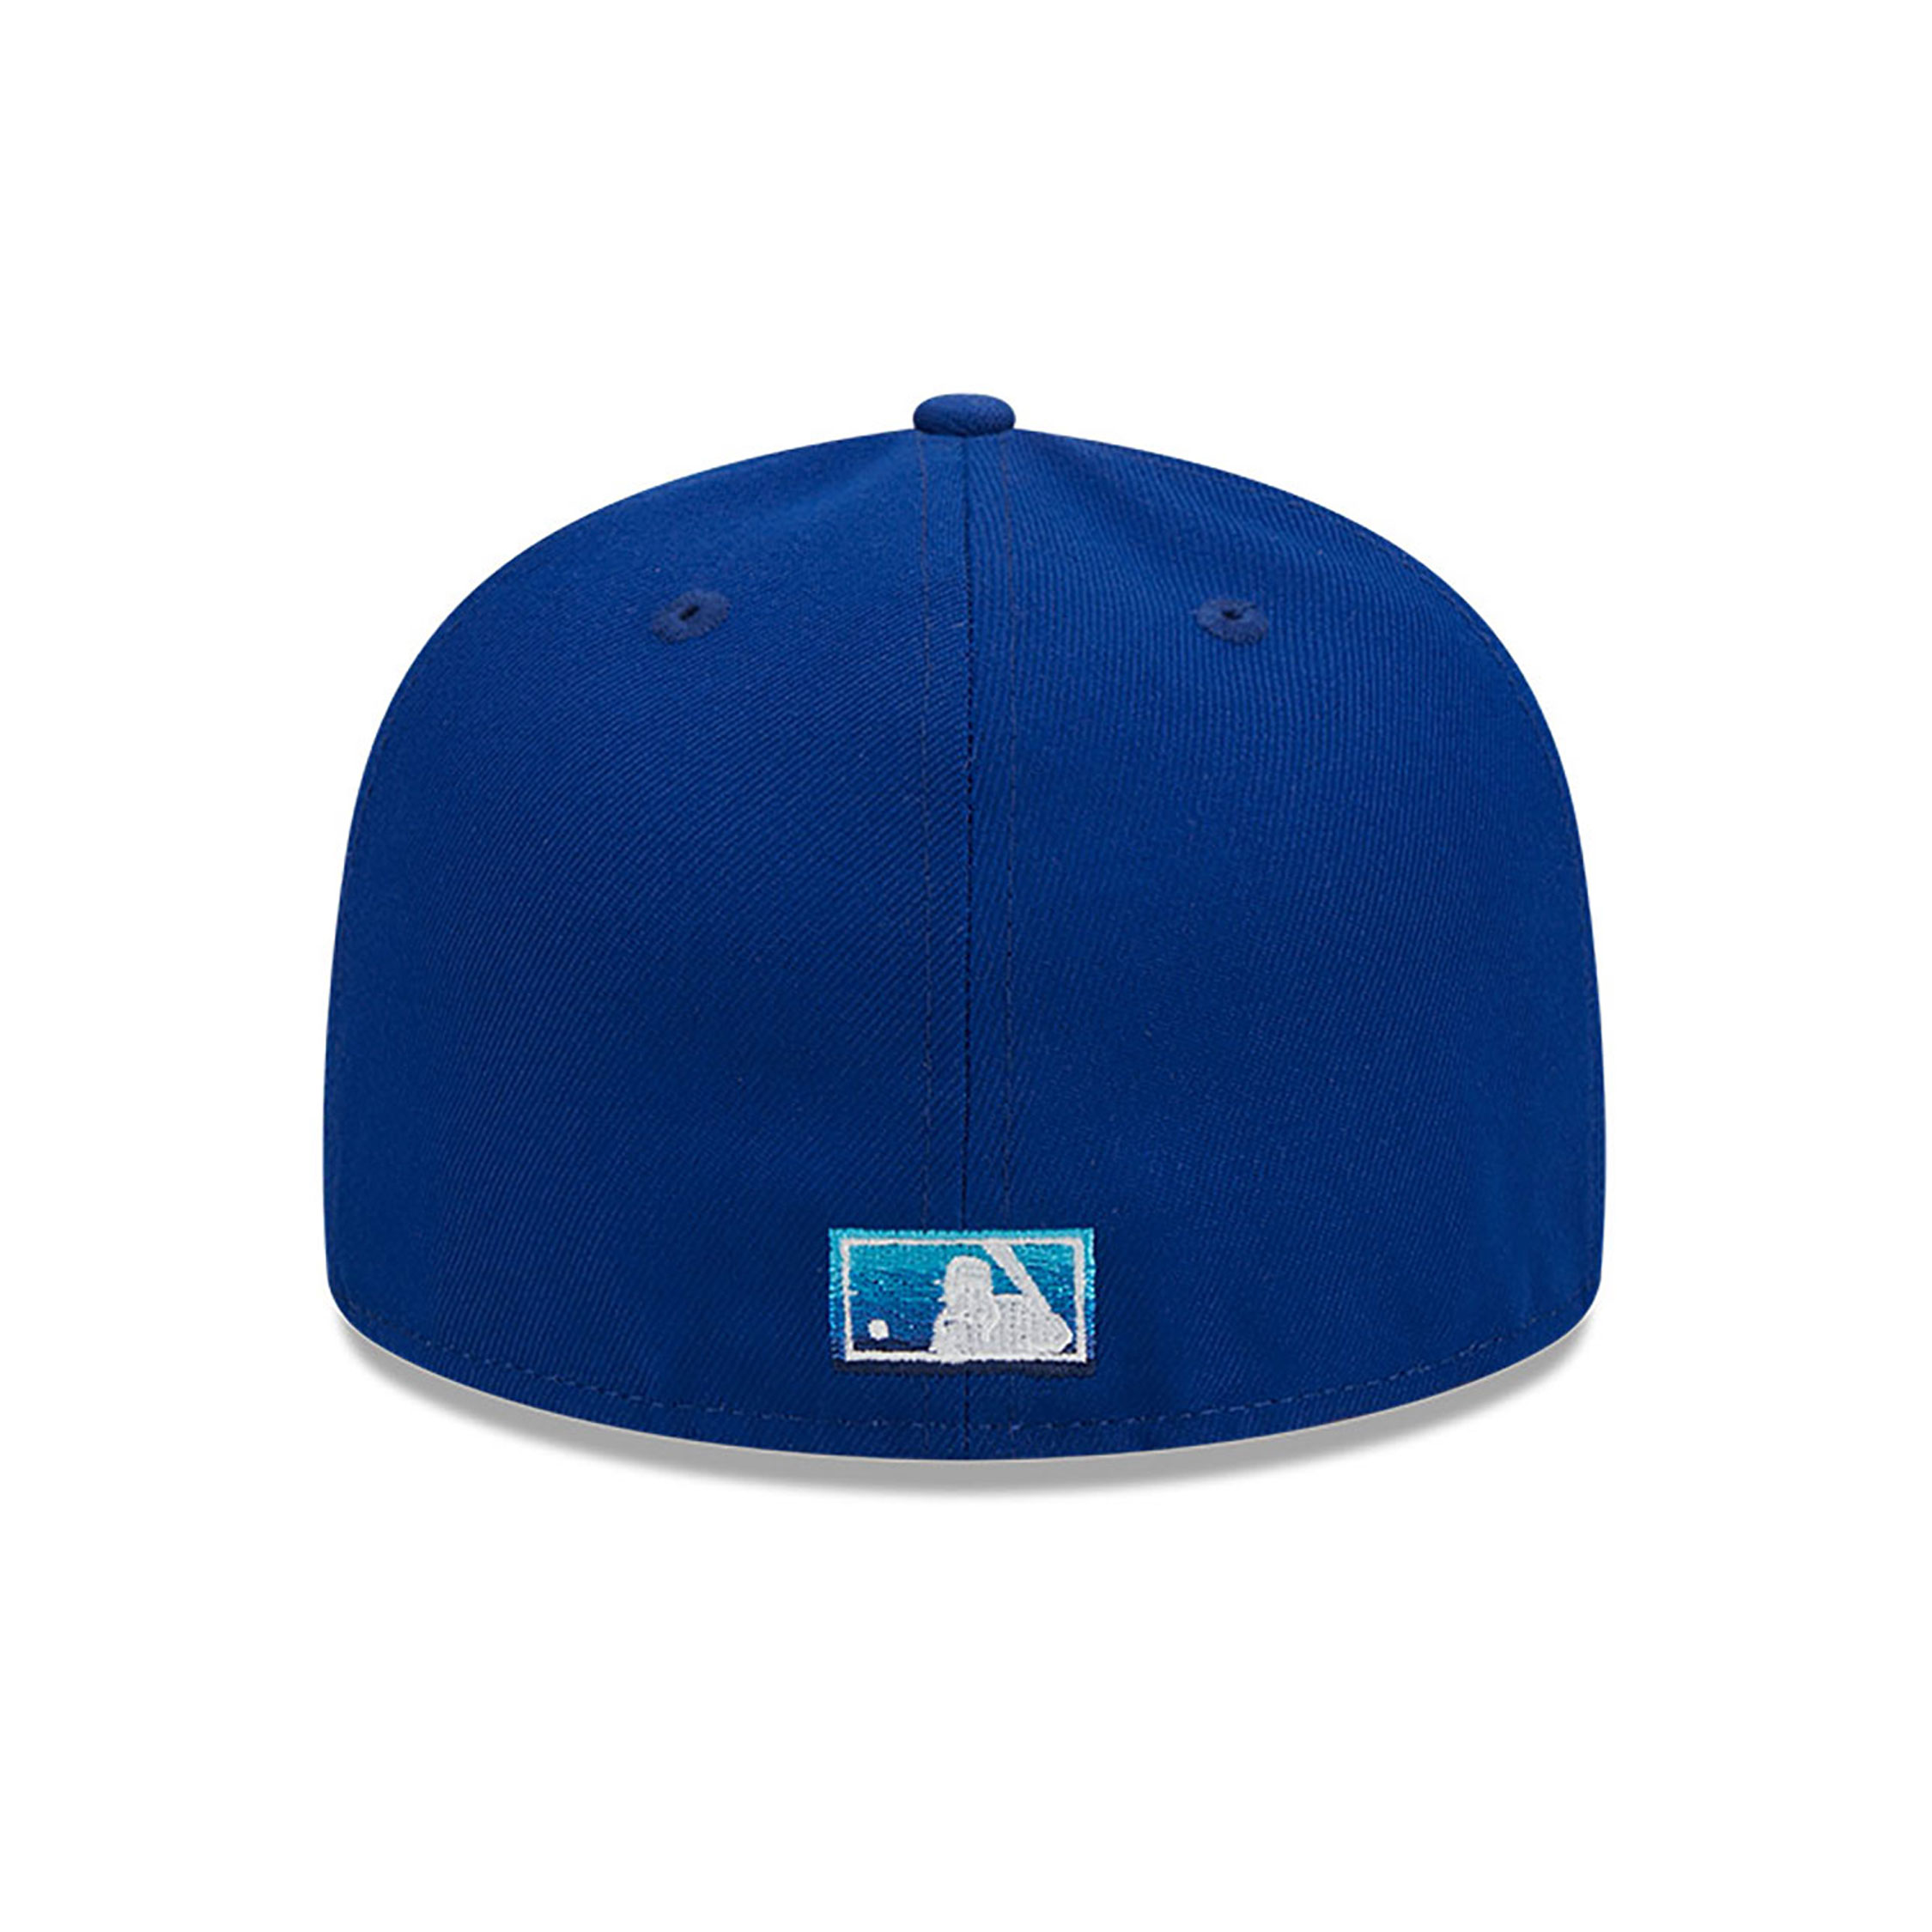 Toronto Blue Jays Gradient Blue 59FIFTY Fitted Cap